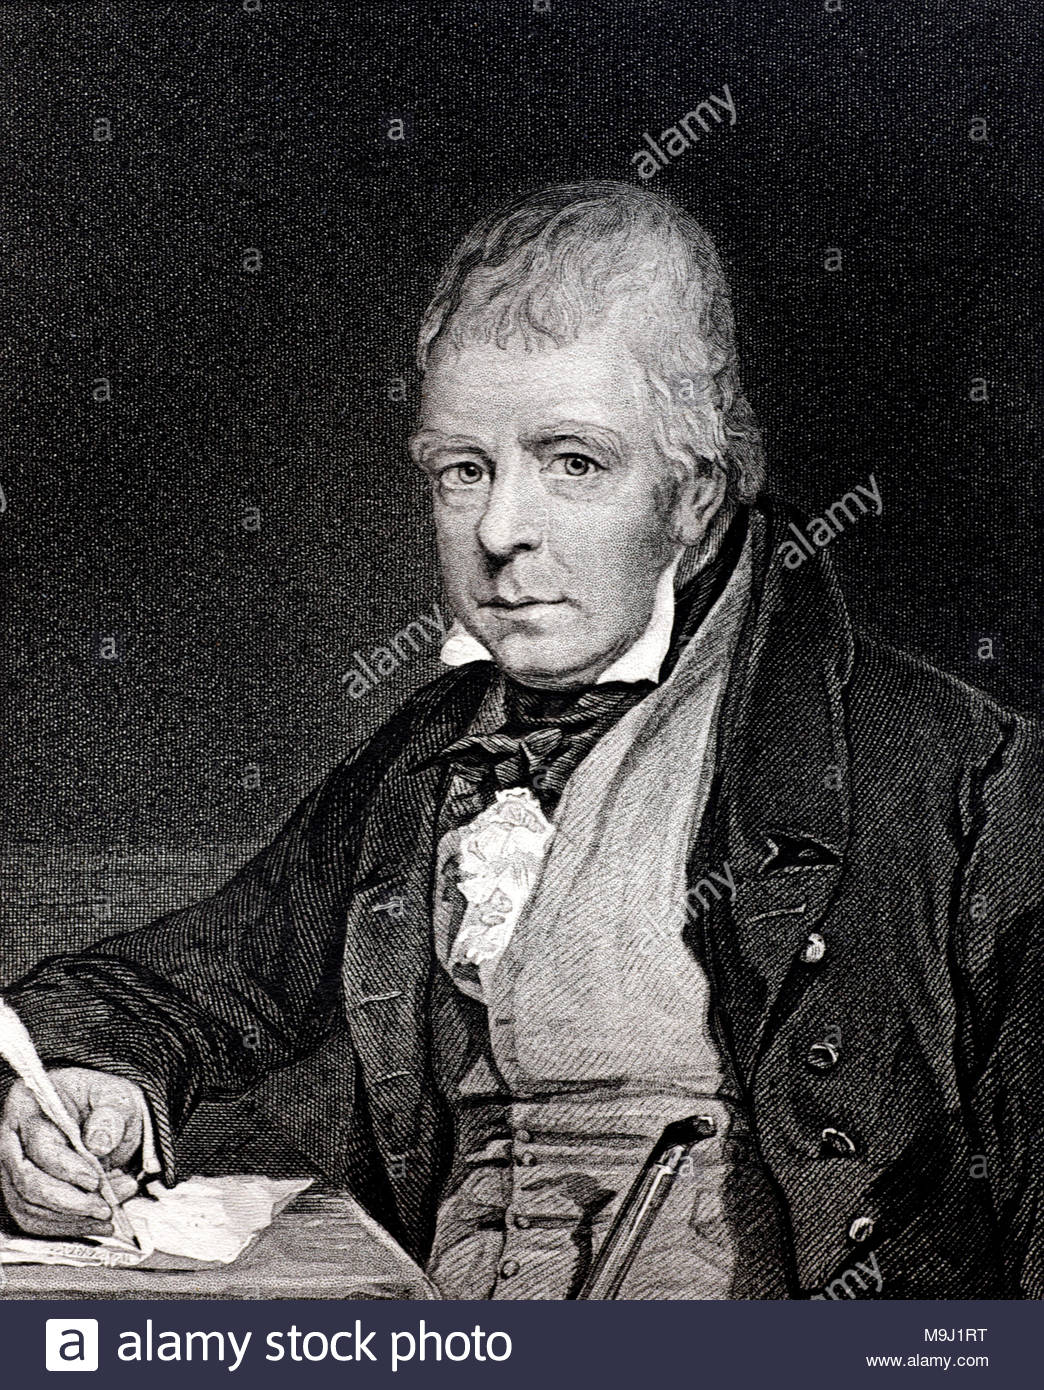 Sir Walter Scott portrait, 1st Baronet, 1771 – 1832, was a Scottish novelist and poet, antique engraving from circa 1833 Stock Photo